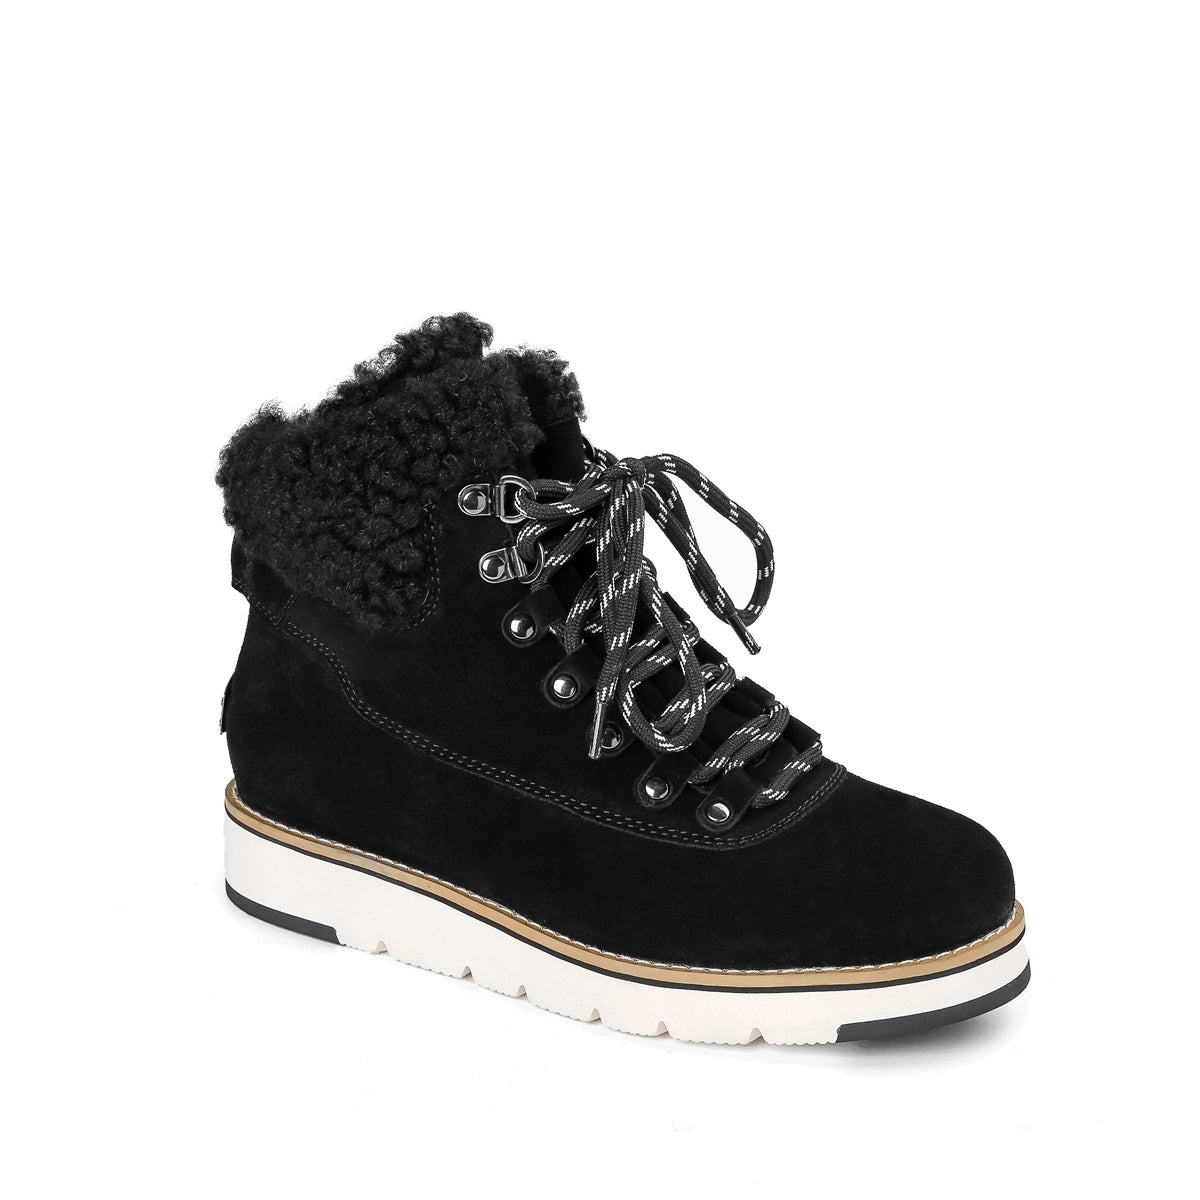 OZWEAR UGG LORI LACE UP SNEAKER BOOTS | Buy Women's Boots - 9341517152310